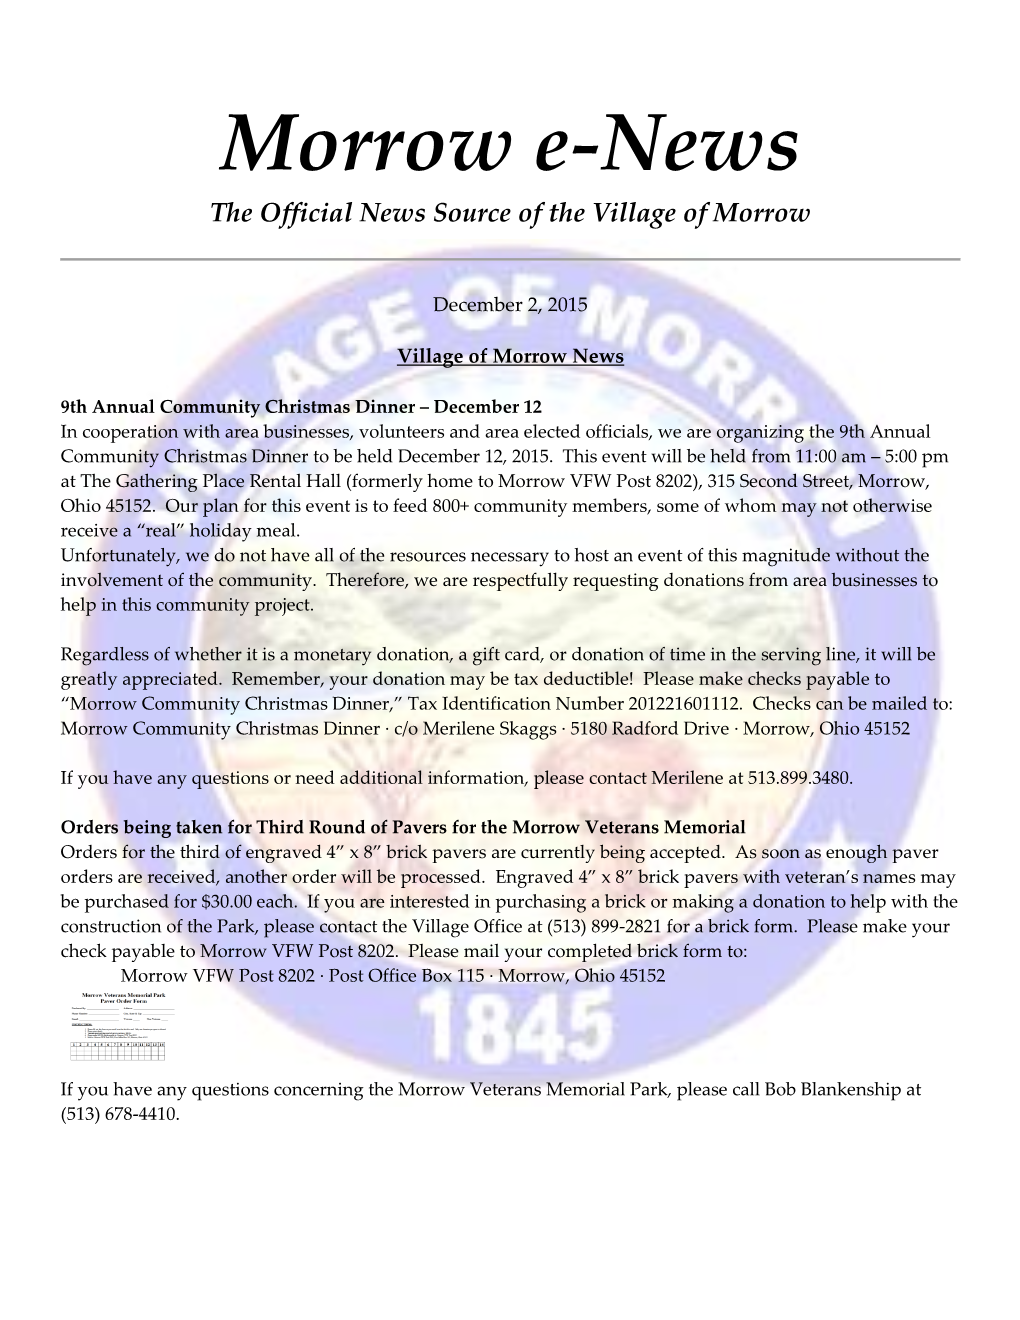 Morrow E-News the Official News Source of the Village of Morrow